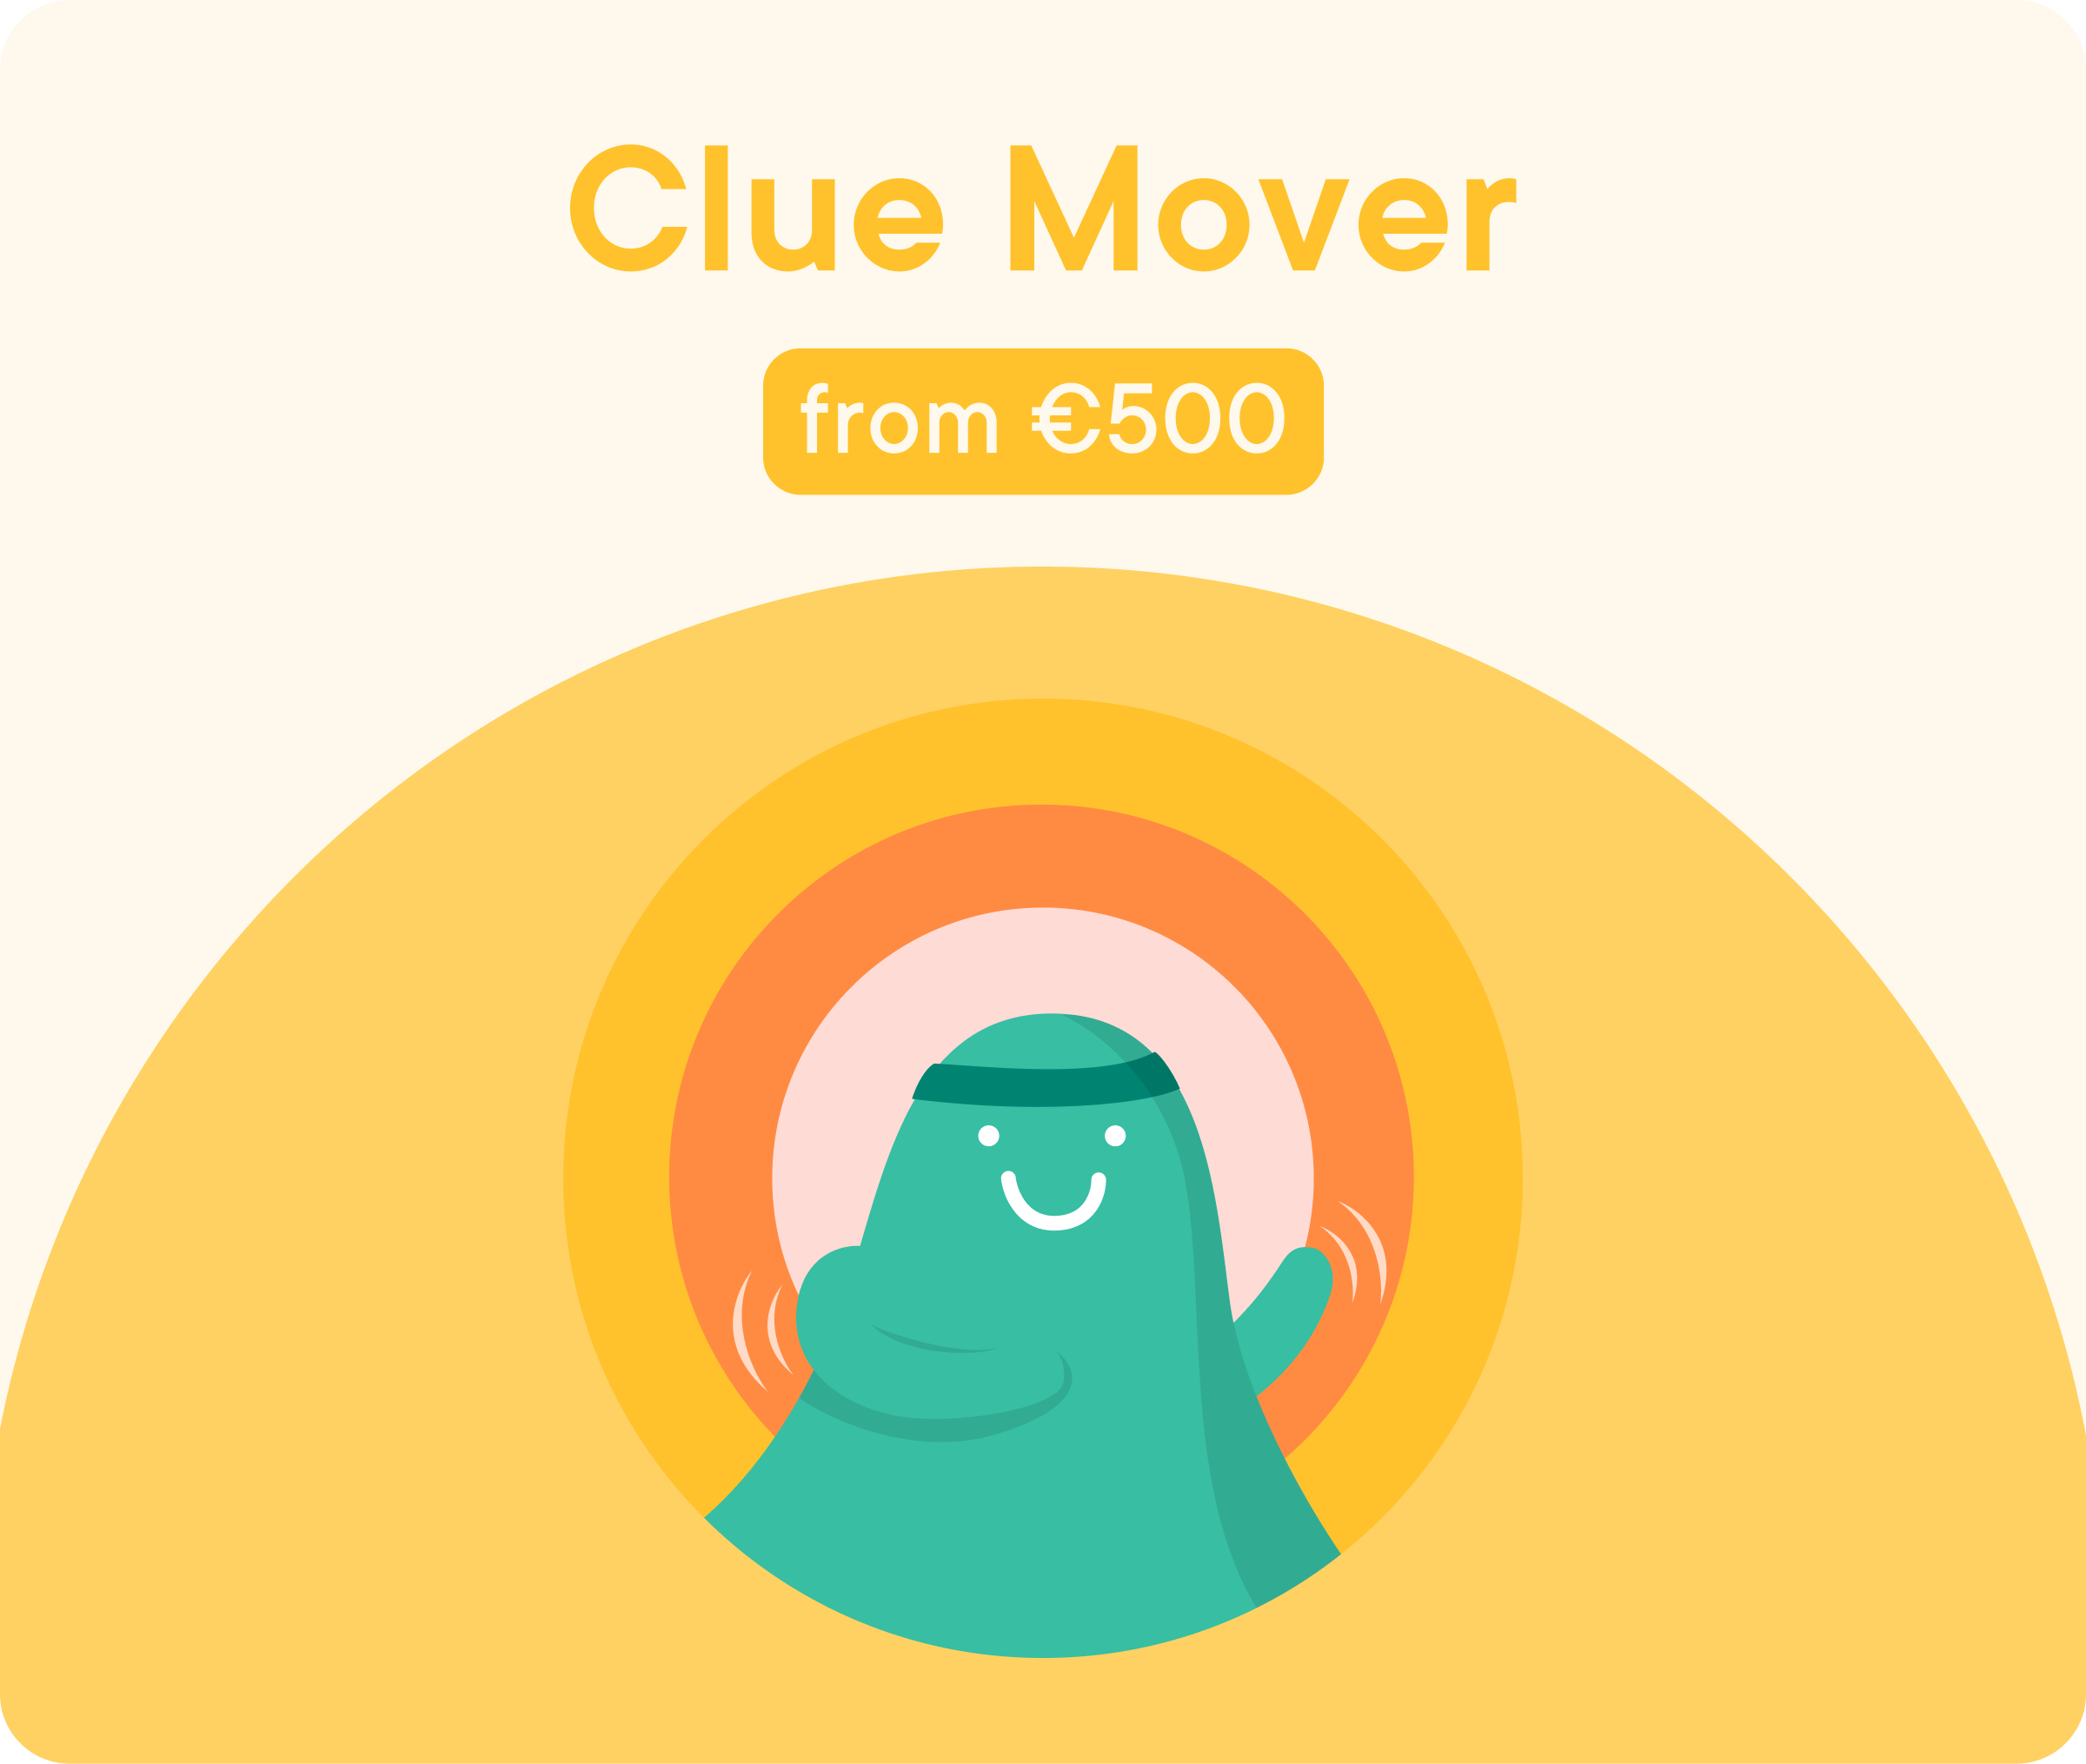 Clue Mover from €500